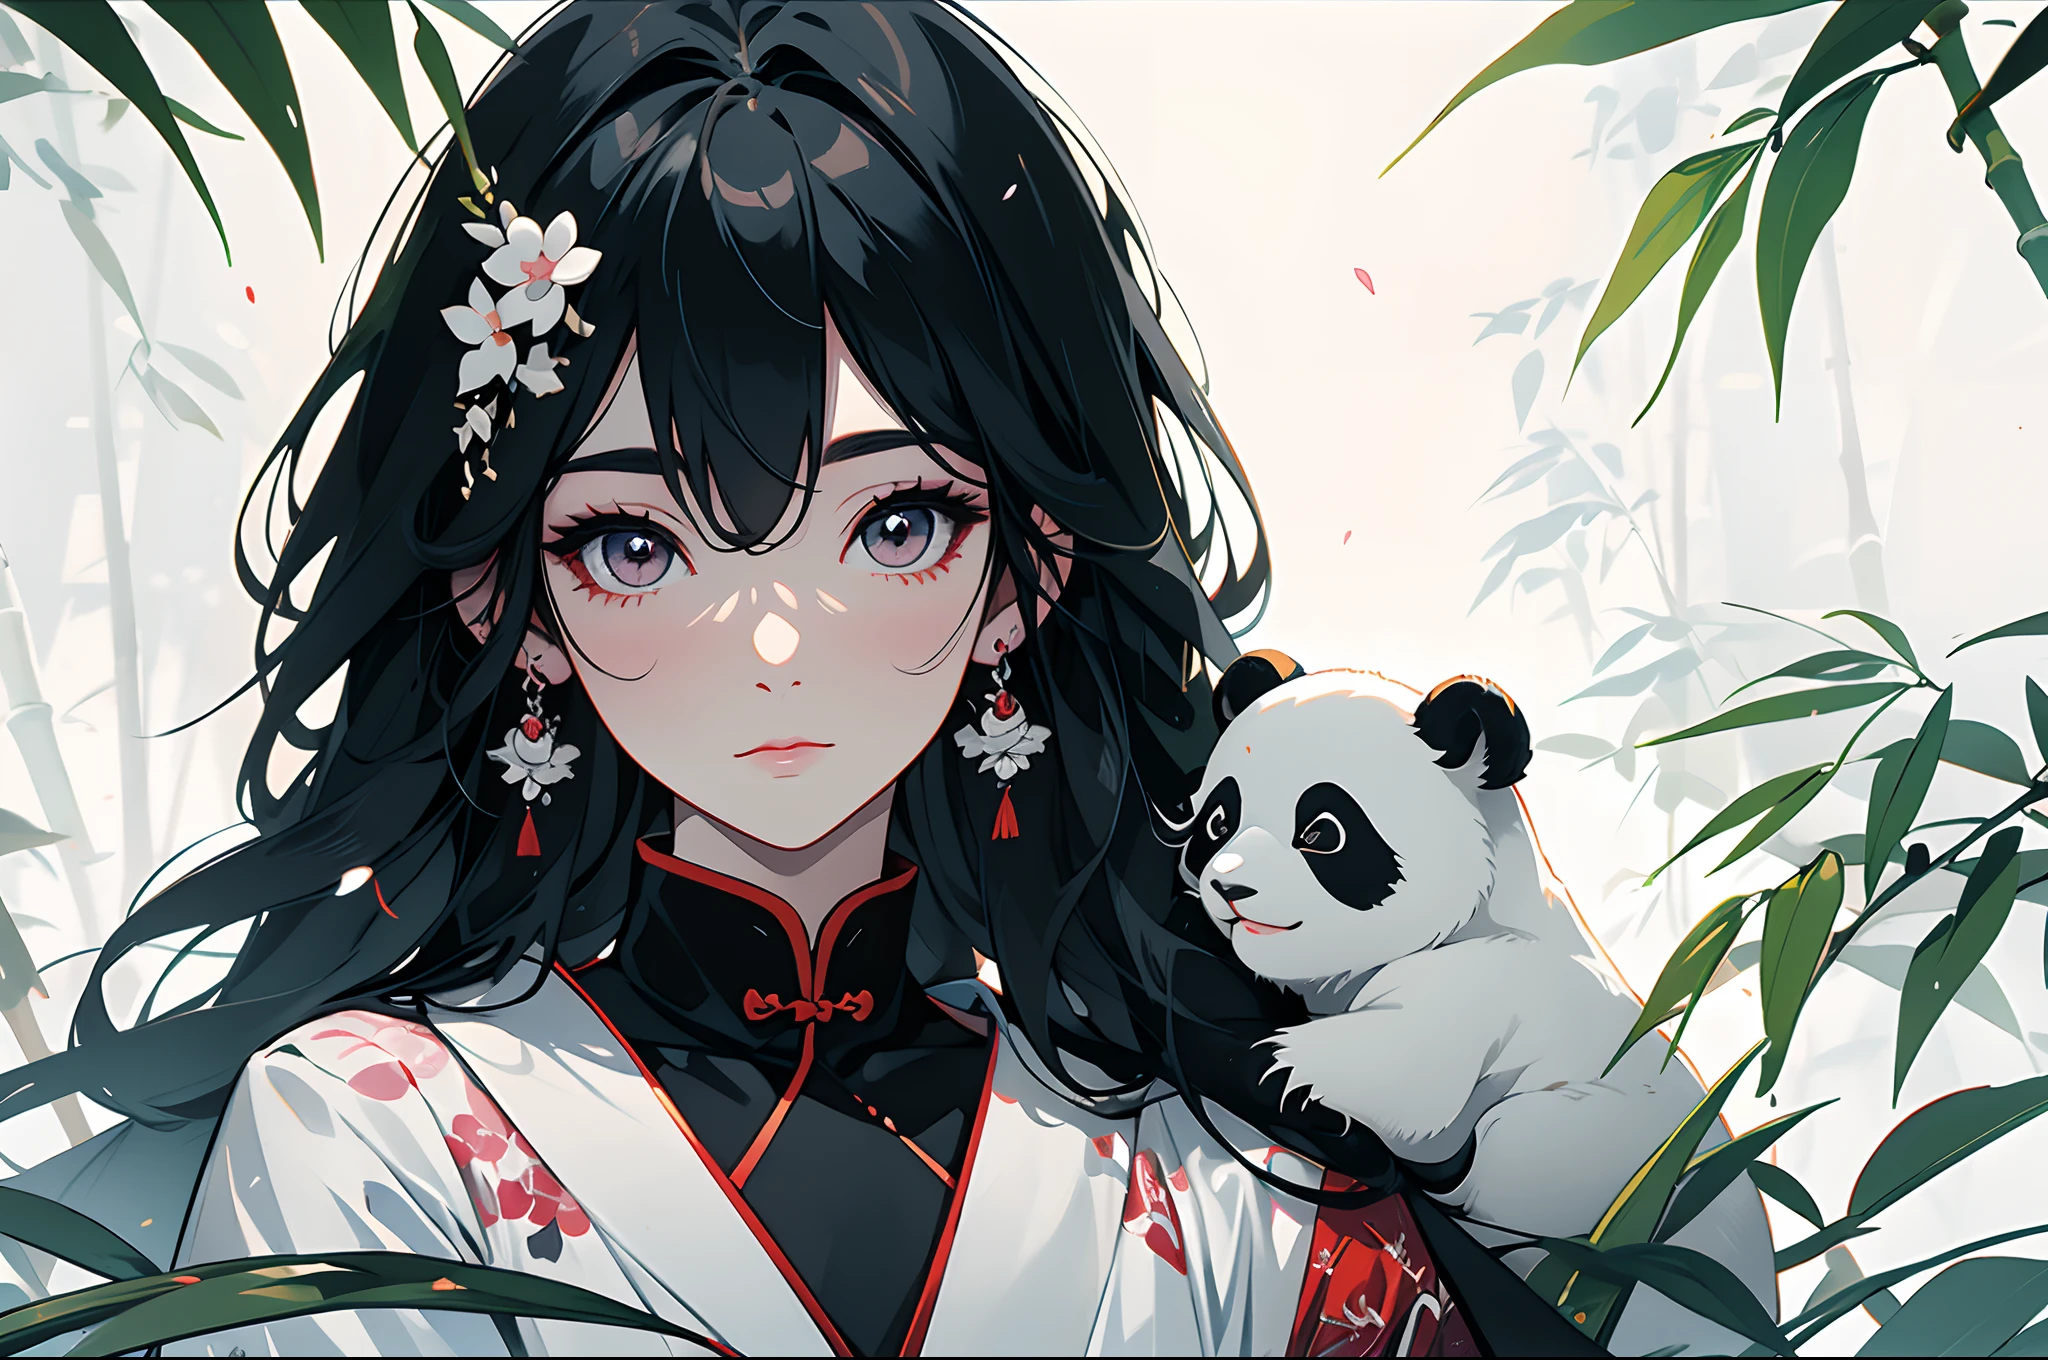 white backgrounid，Under bamboo leaves, (The panda sits on a branch)，pandas，（1Blittle girl：1.5，The upper part of the body，looking at viewert），Pink and white clothes，facial closeups，big beatiful eyes，detailed face with，Flashy clothes，Ethereal panda，(Chinese Panda)，Dreamy，Onmyoji detailed art，A beautiful artwork illustration，mythological creatures，pandas，Beautiful digital artwork